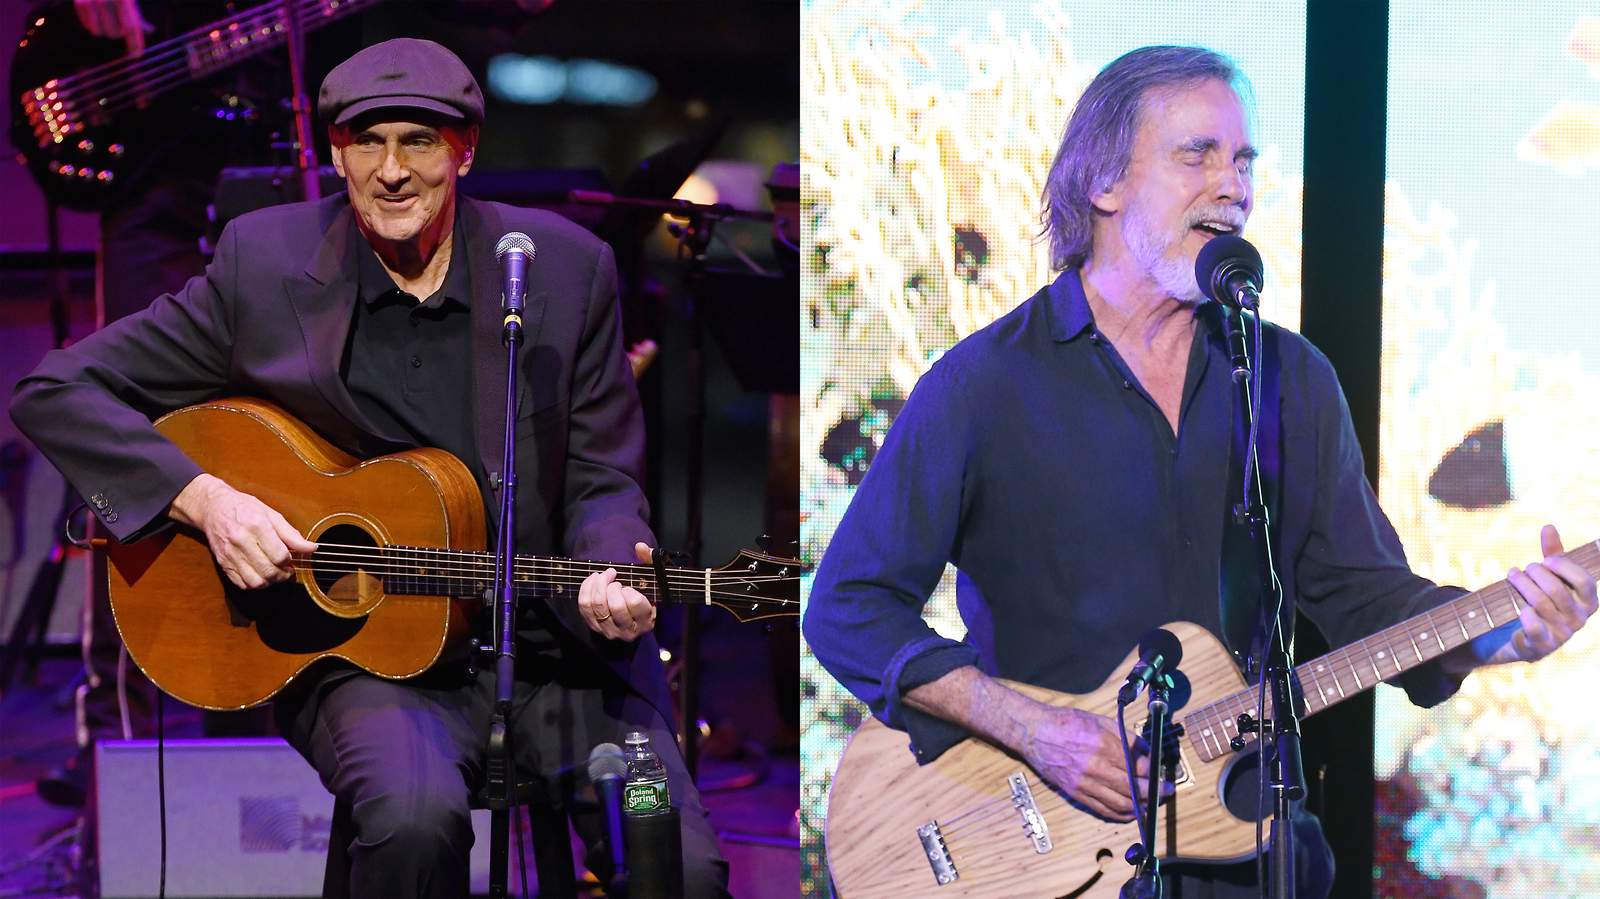 James Taylor, Jackson Browne set to perform in Roanoke this summer